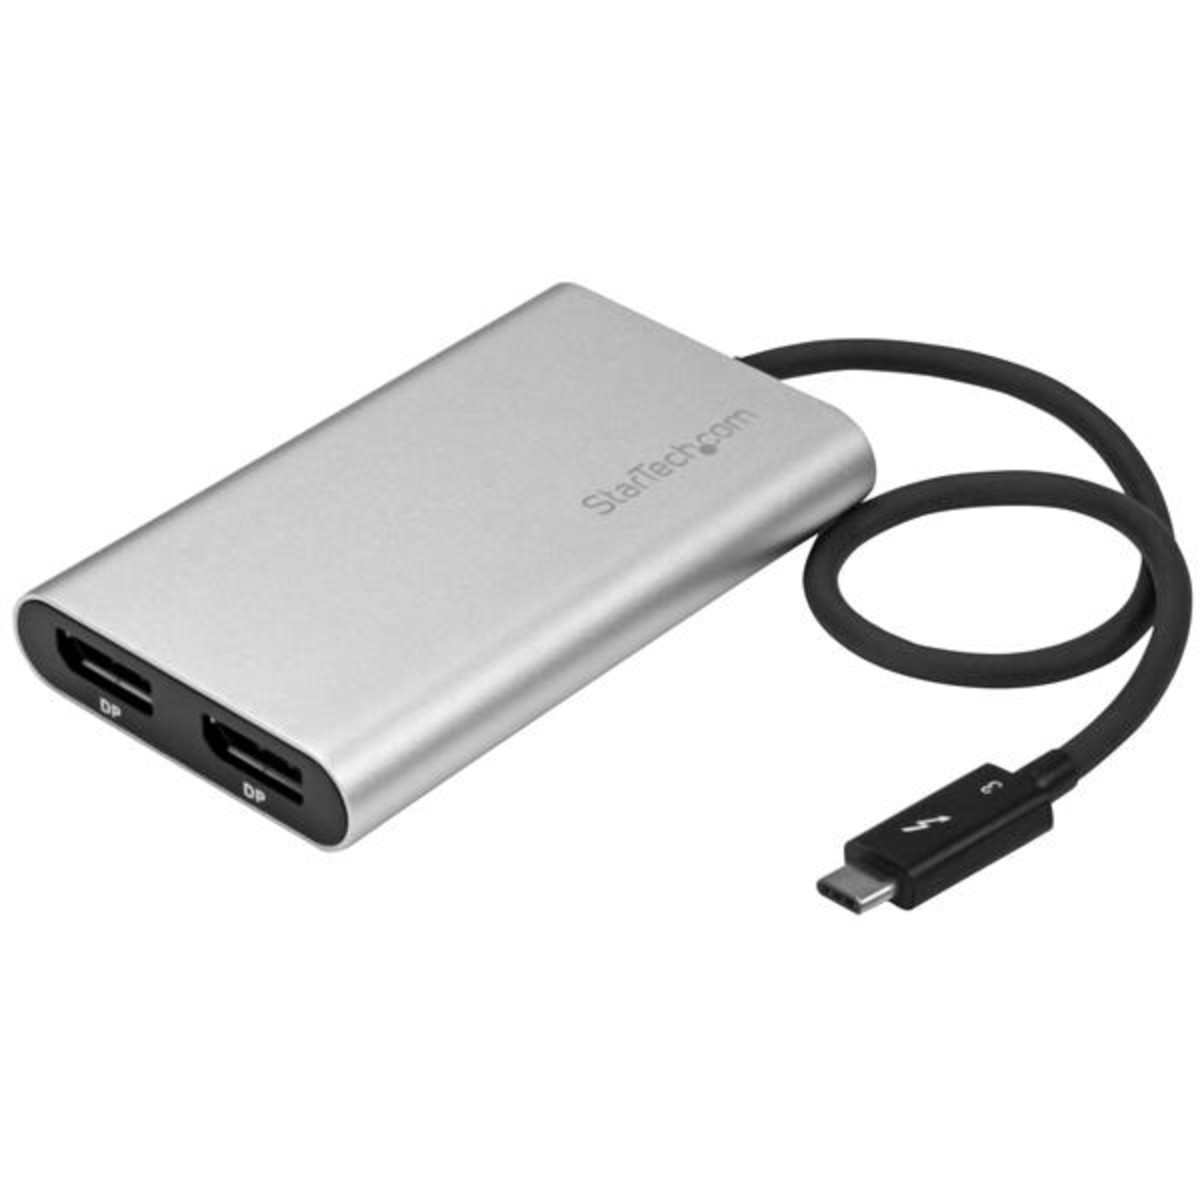 Thunderbolt 3 to Dual DP Adapter